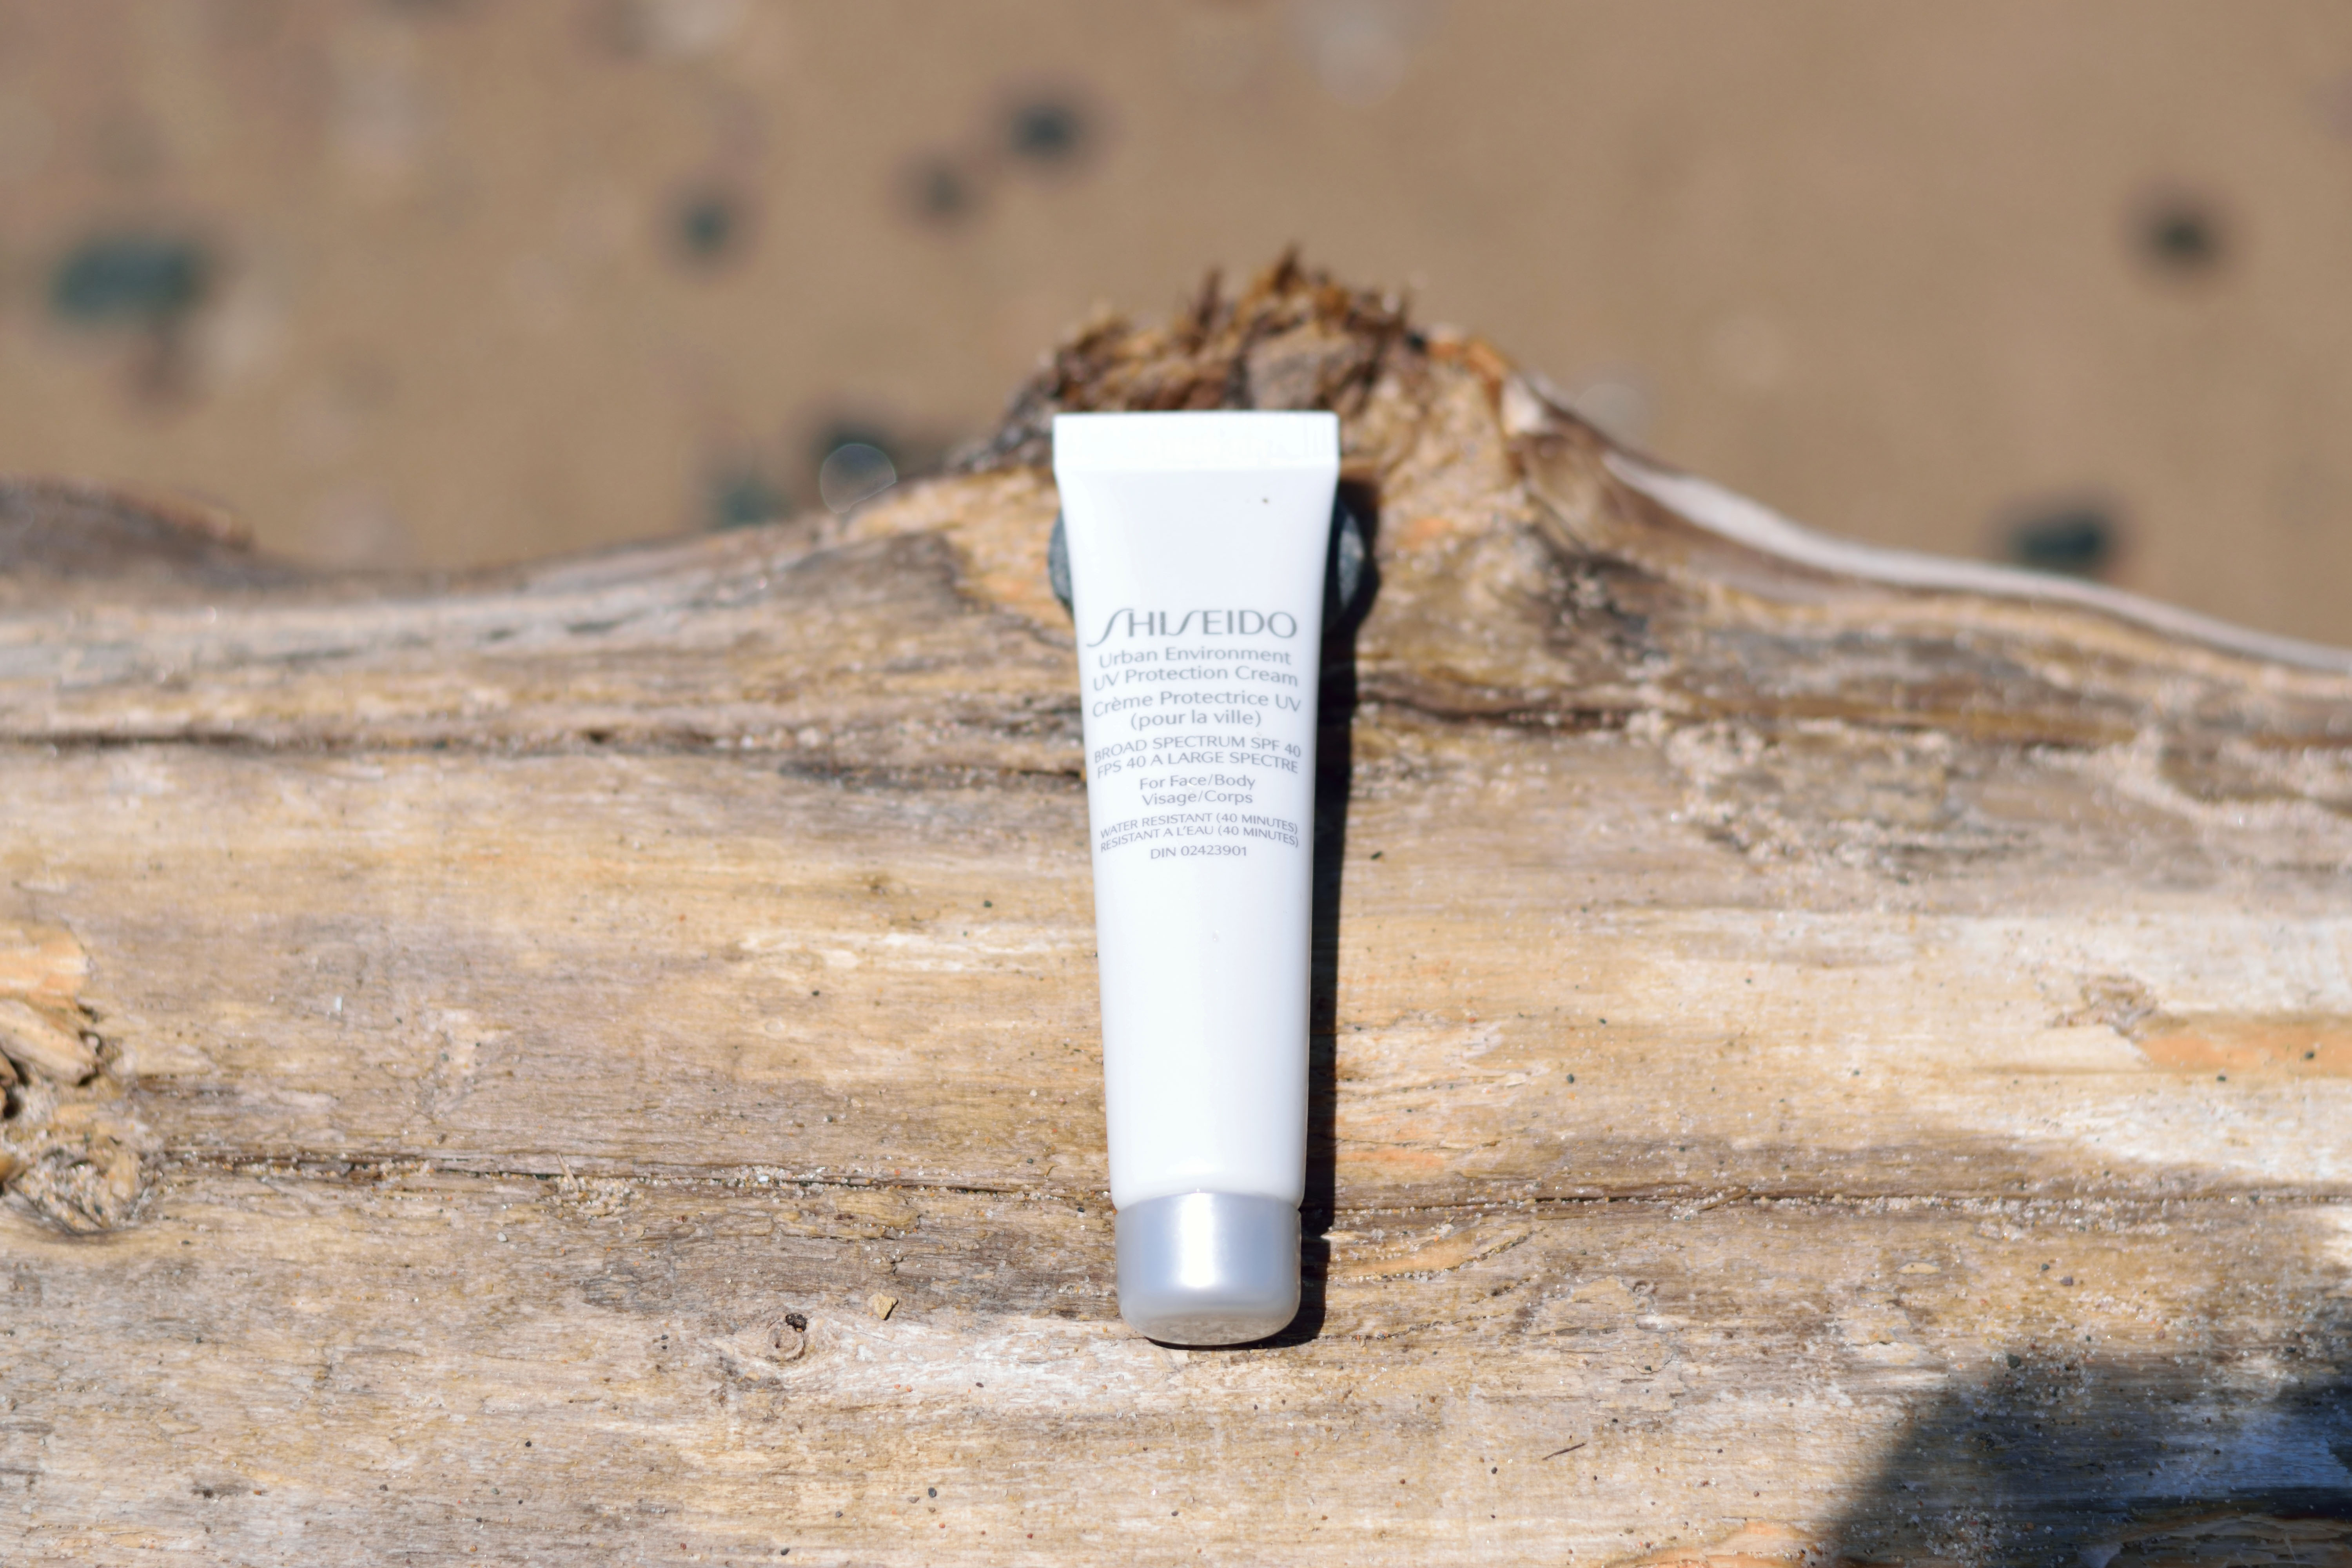 Protect from the sun with Shiseido Wetforce BB SPF products